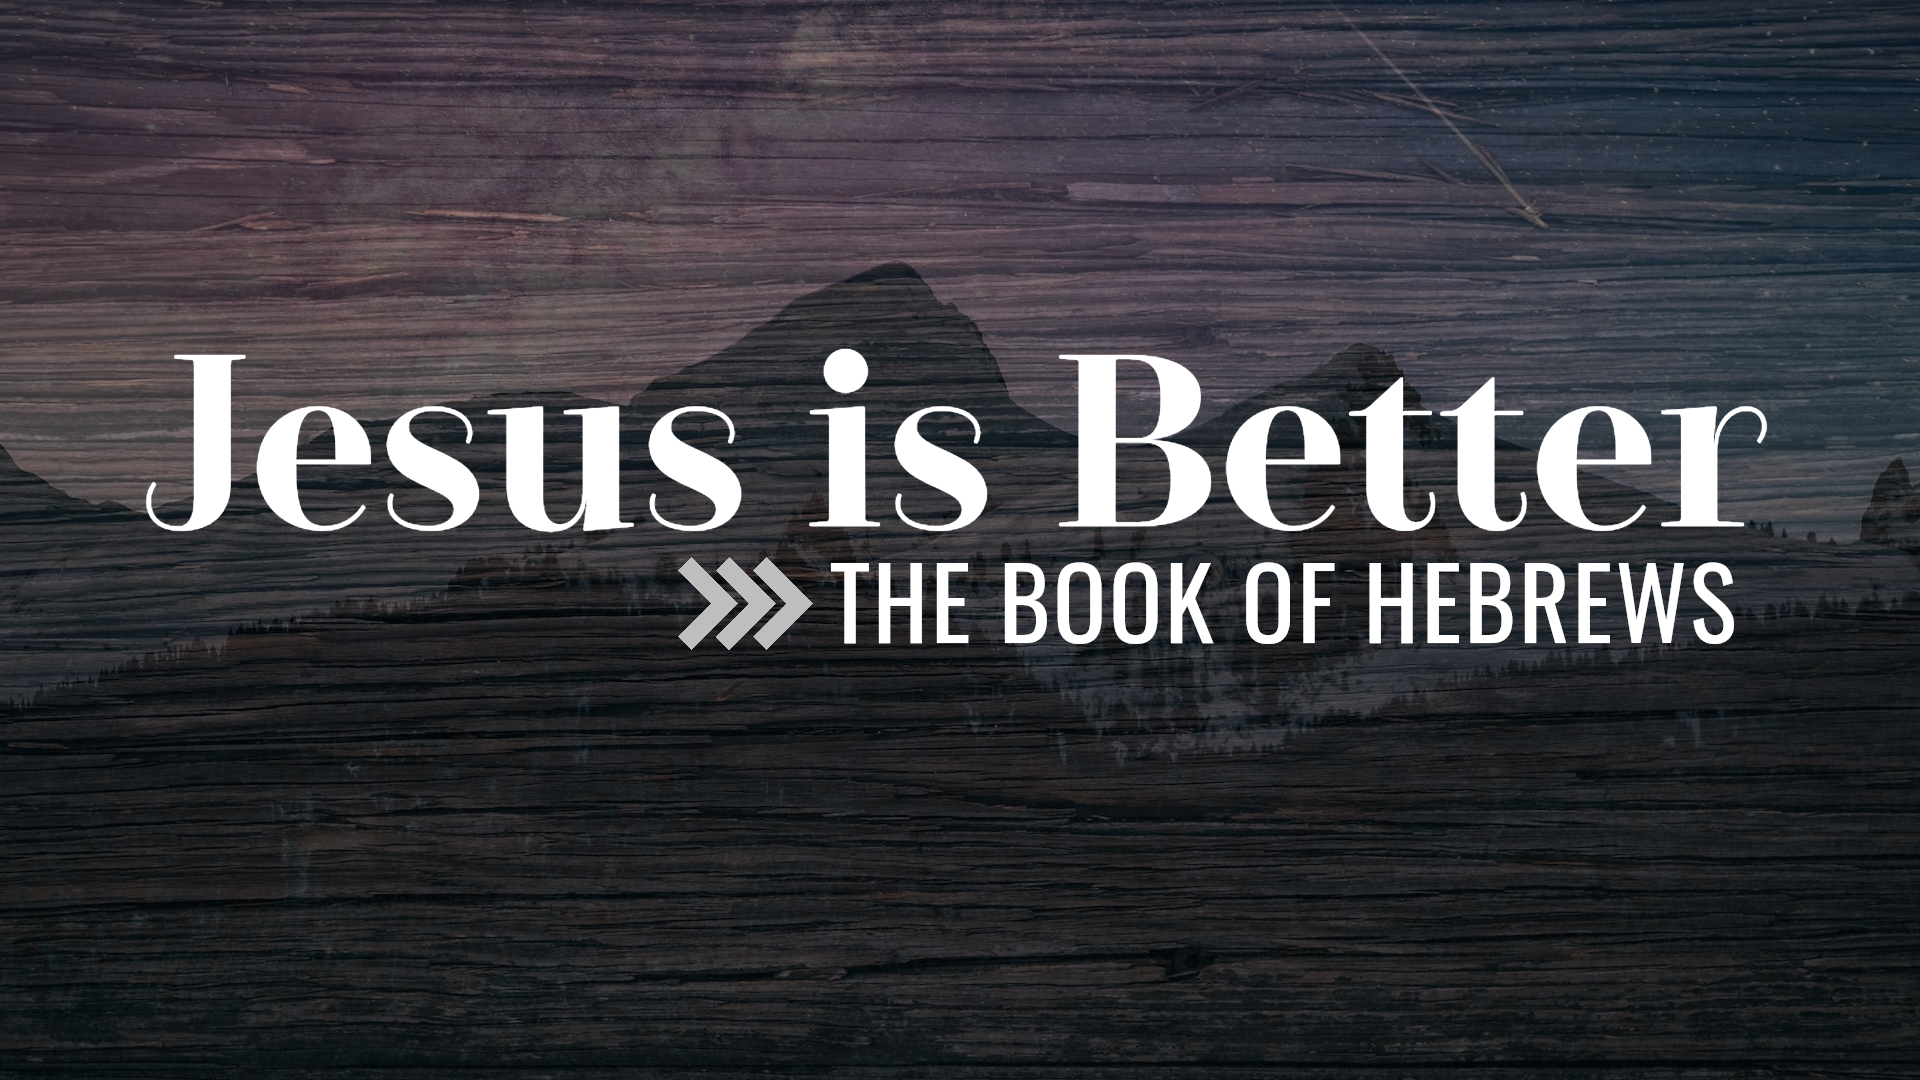 Introduction to the New Sermon Series: Jesus is Better > The Book of Hebrews